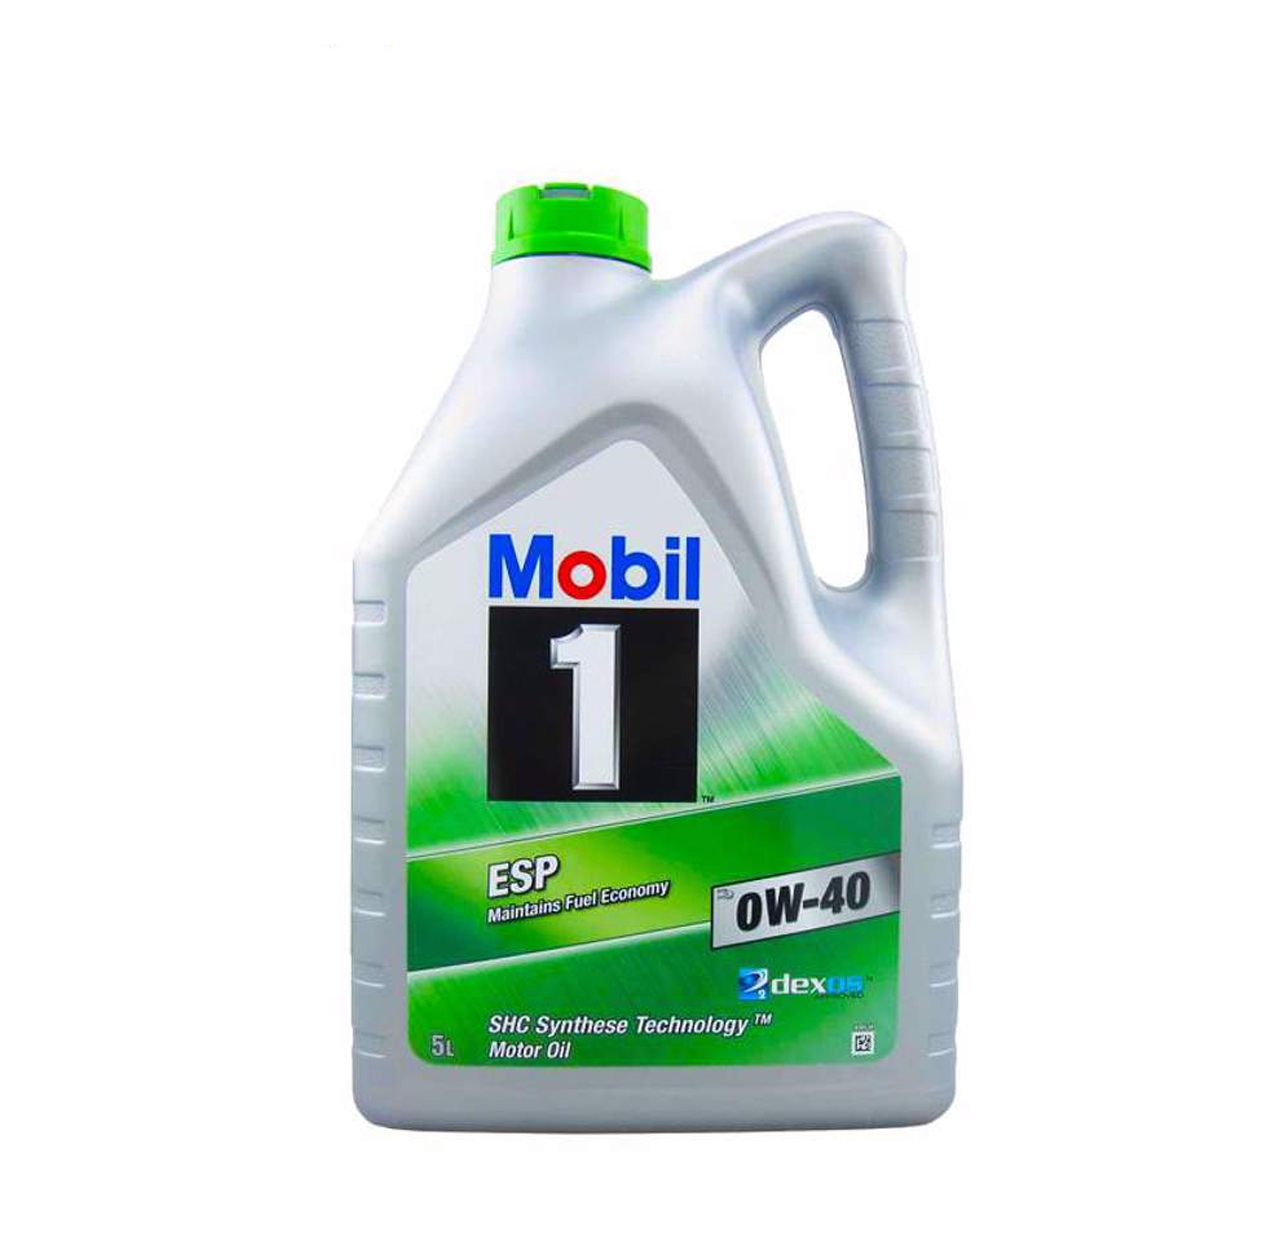 Mobil 1 Fully synthetic ESP 0W40